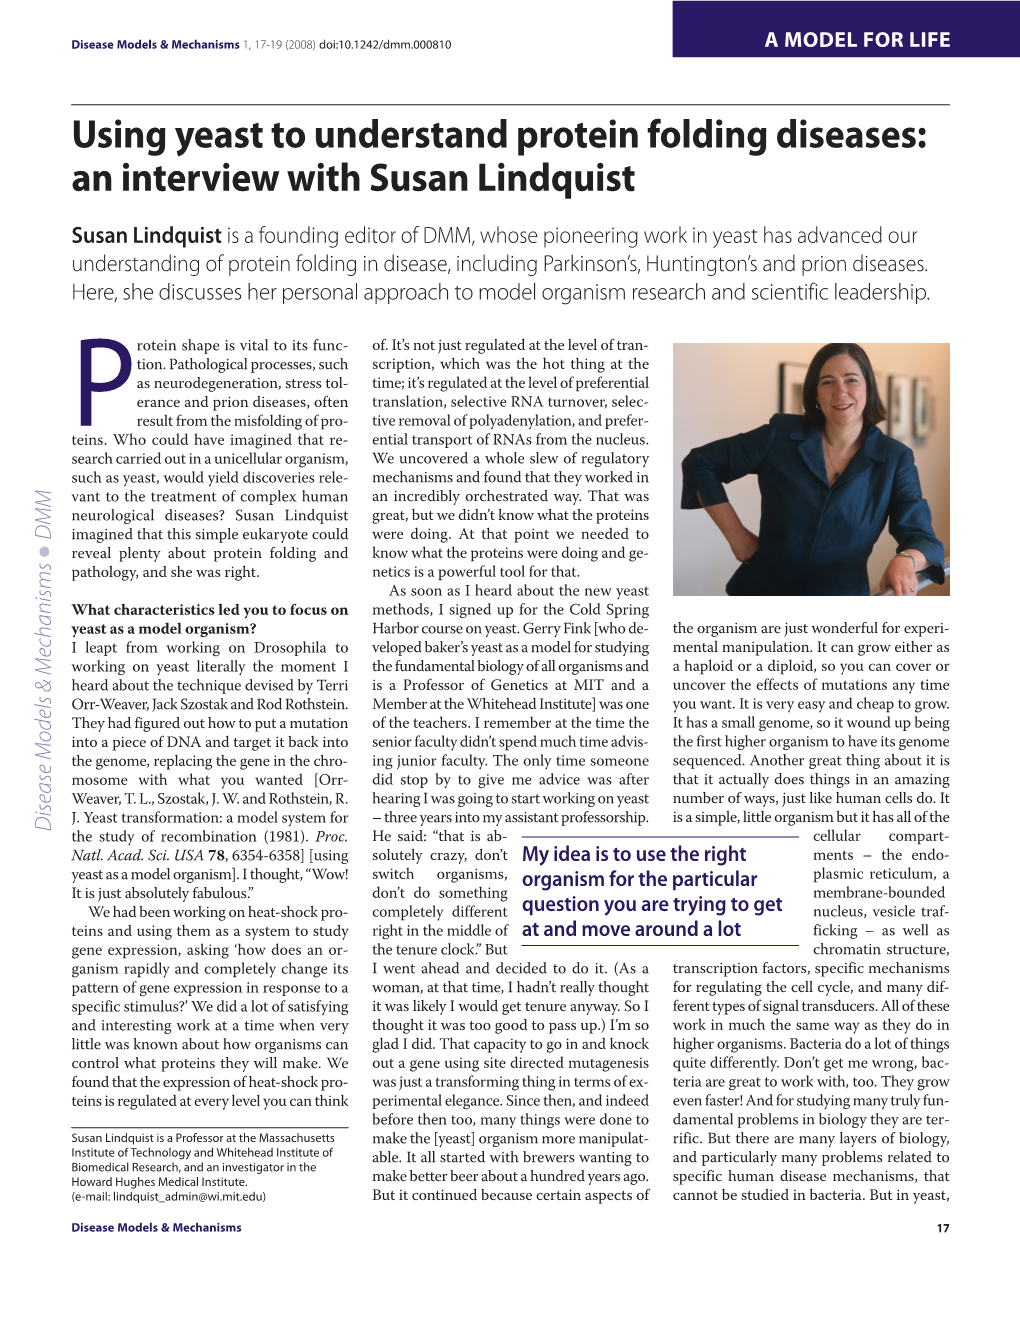 Using Yeast to Understand Protein Folding Diseases: an Interview with Susan Lindquist